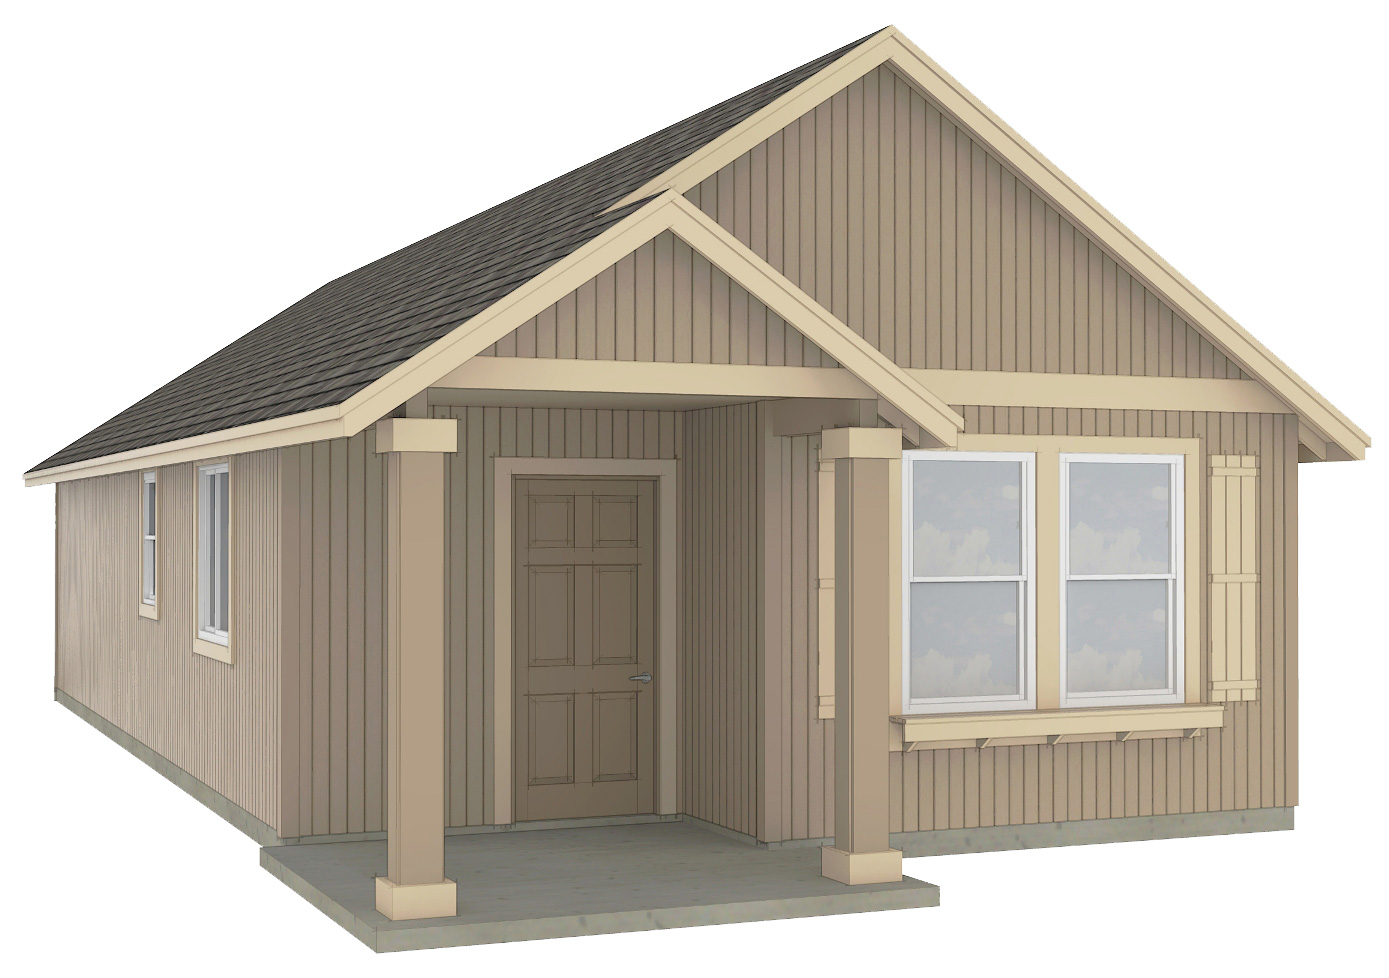  Small  House  Plans  Wise Size Homes 